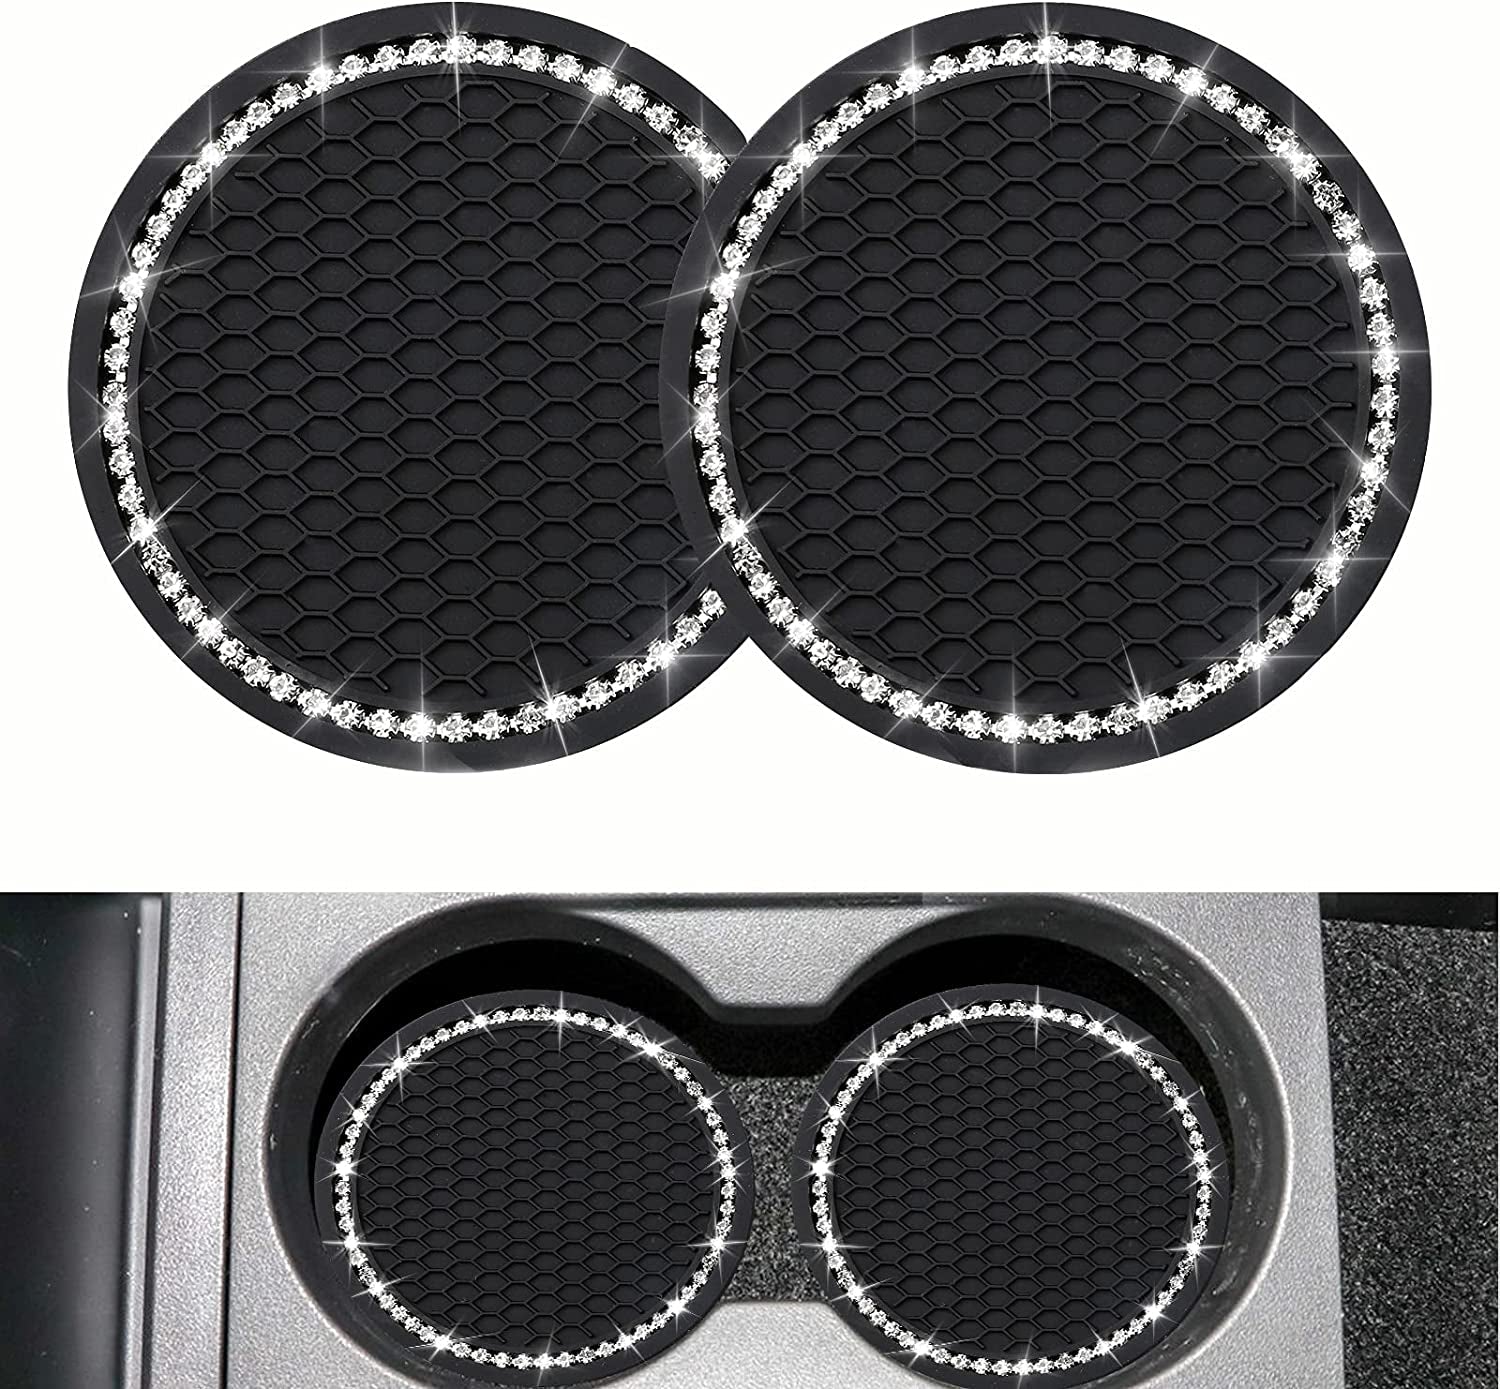 2PCS Bling Car Cup Coaster, Universal Vehicle Cup Holder Insert Coaster, 2.75 Inch Rhinestone anti Slip Silicone Car Accessories, Suitable for Most Car Interior, Gift for Women